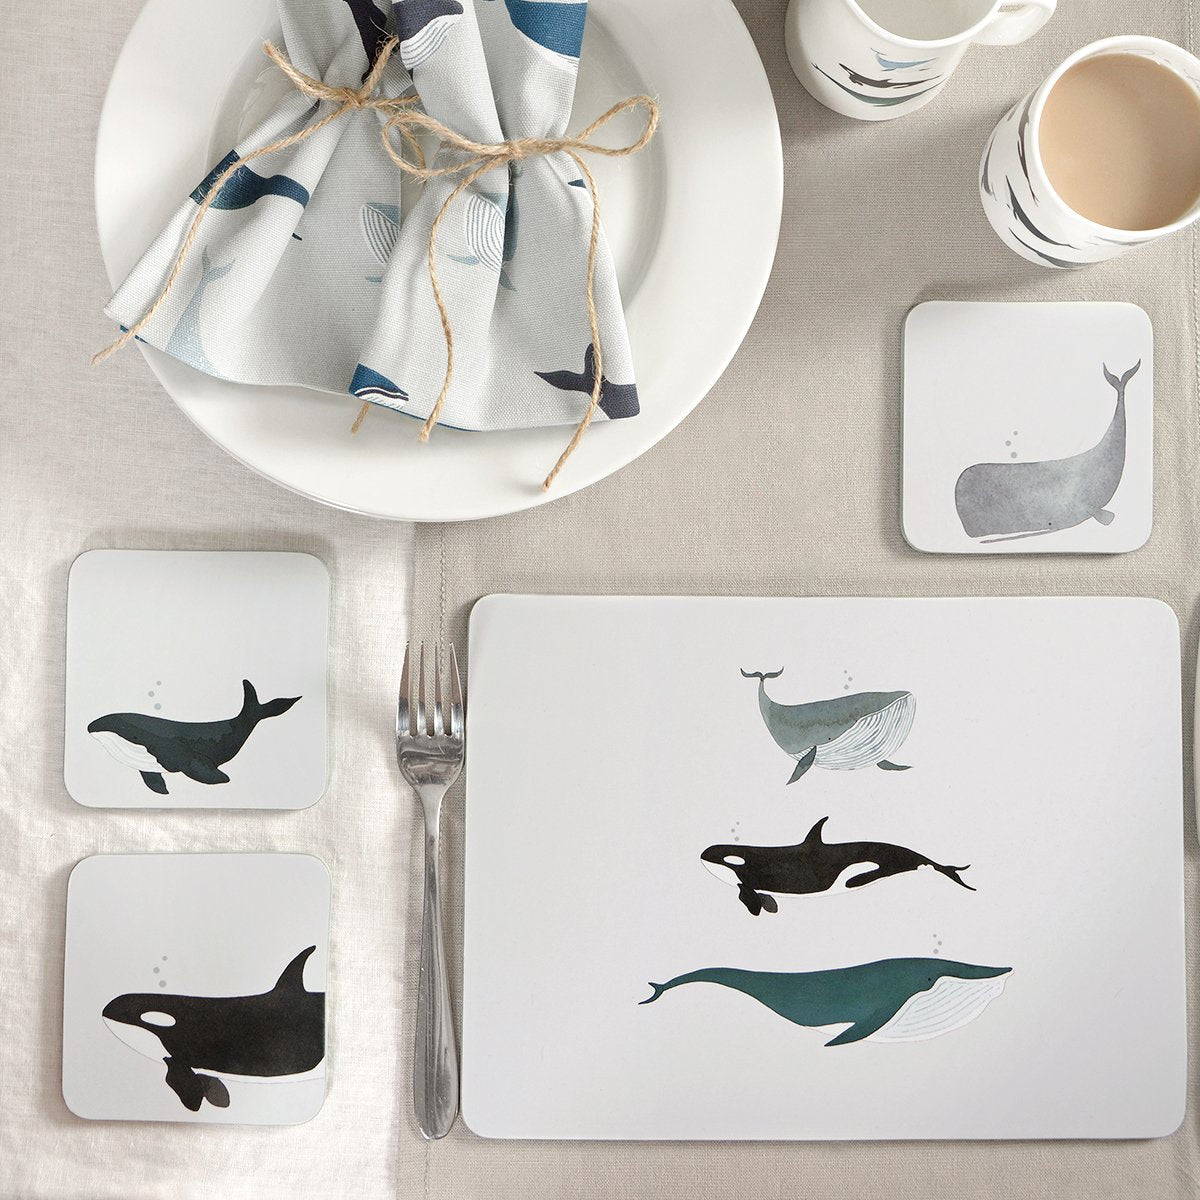 Whales Cork Place mats (set of 4) by Sophie Allport